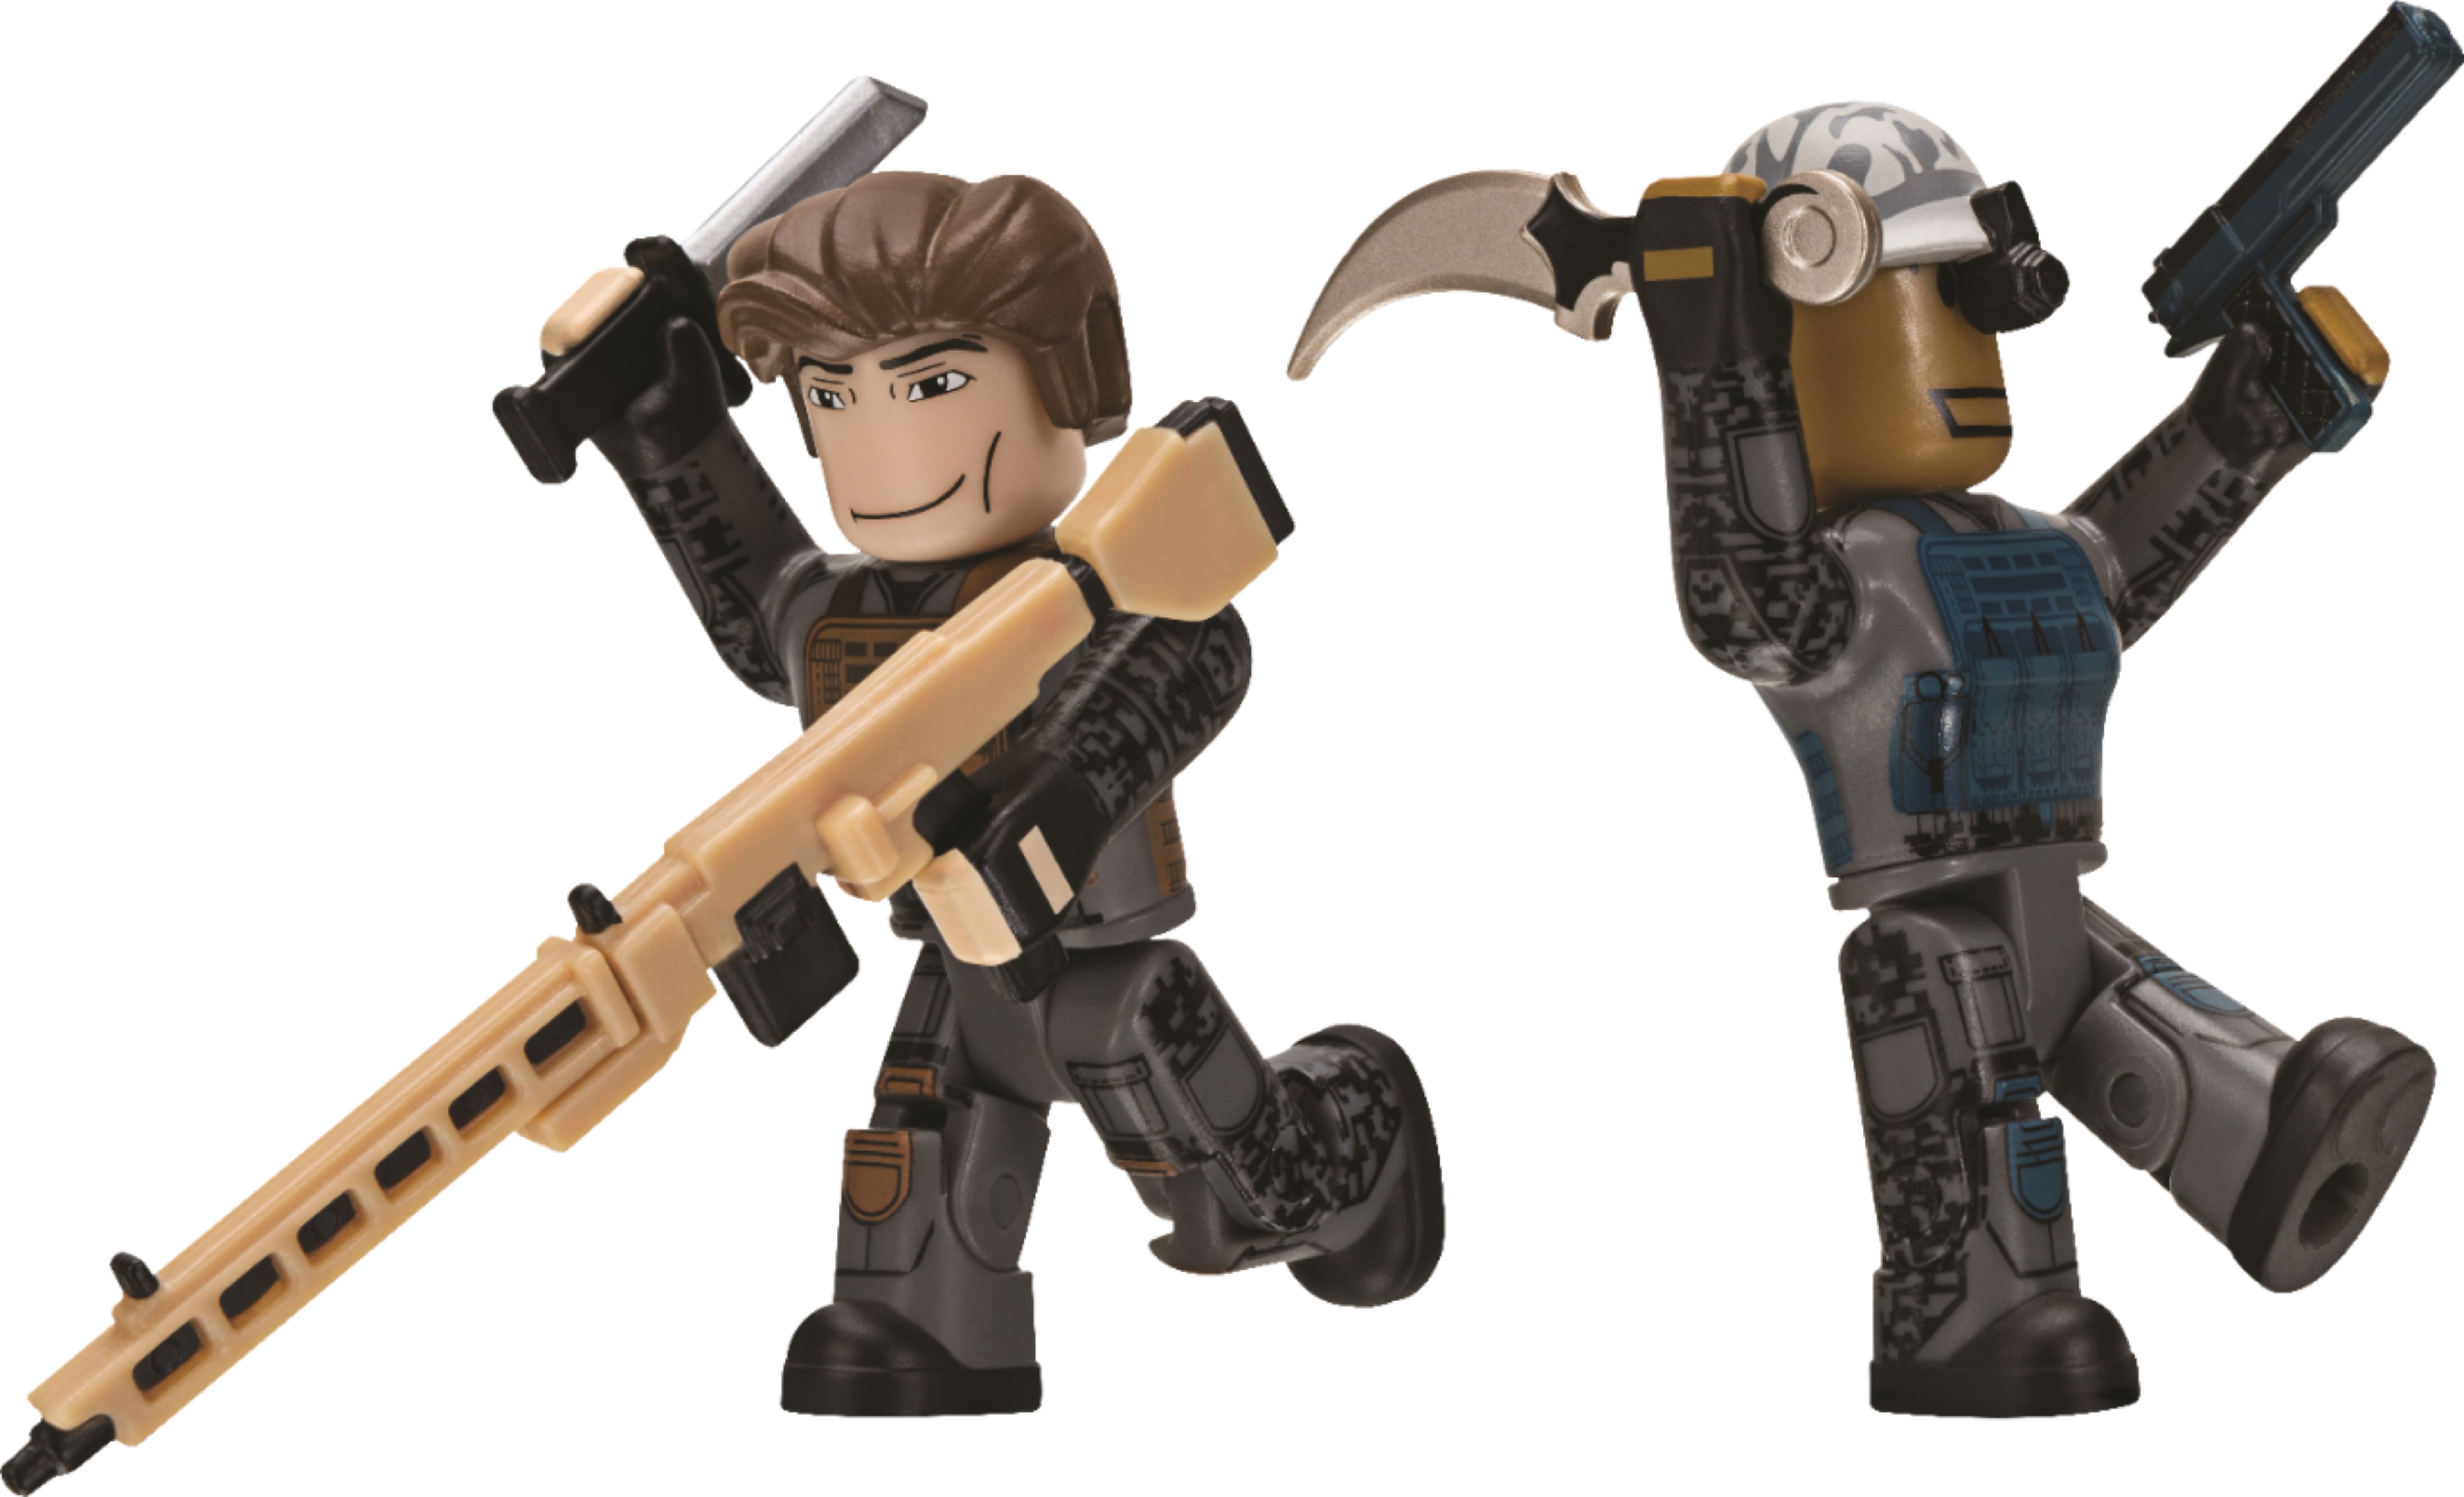 Roblox Game Pack Styles May Vary Rob0313 Best Buy - jazwares roblox imagination articulated figure styles may vary rob0268 best buy